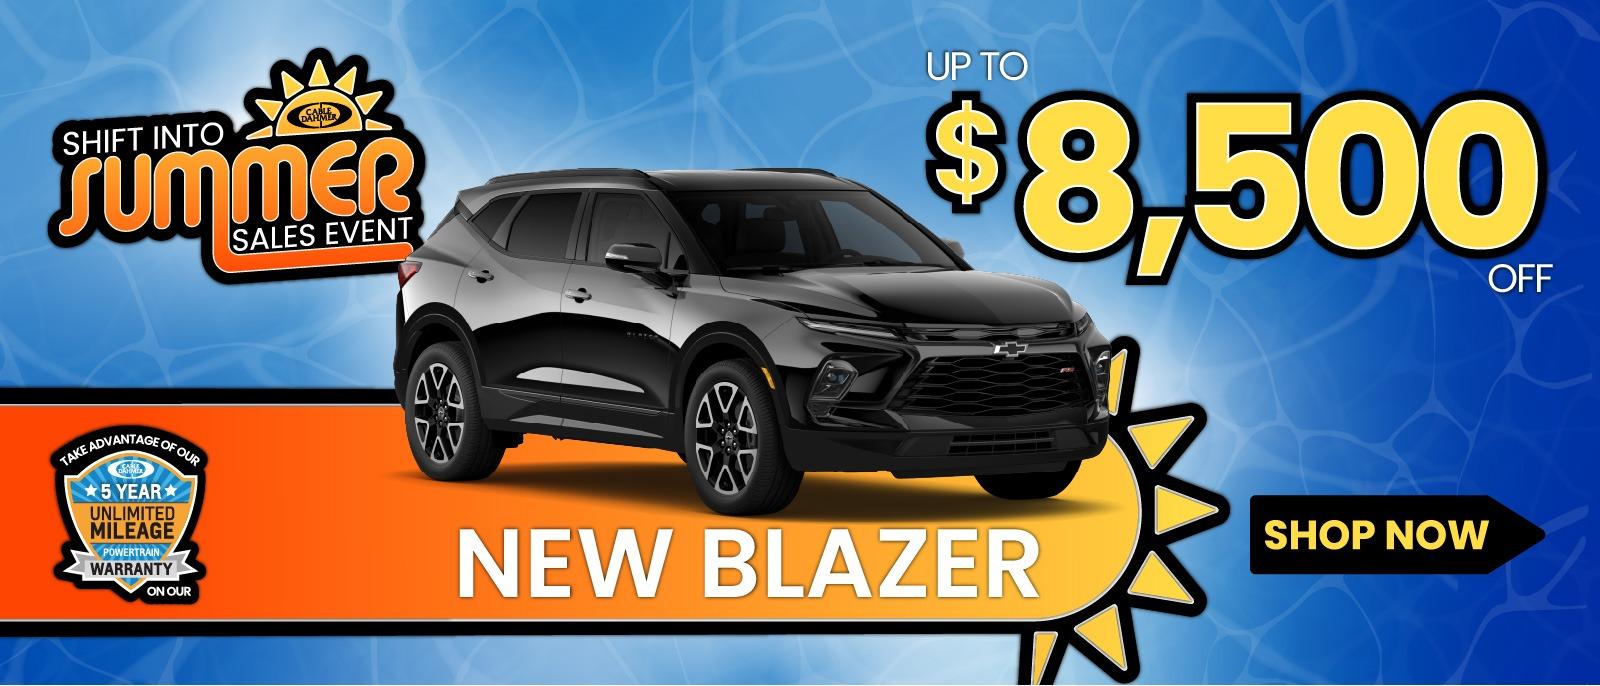 New Chevy Blazer for up to $8,500 off.